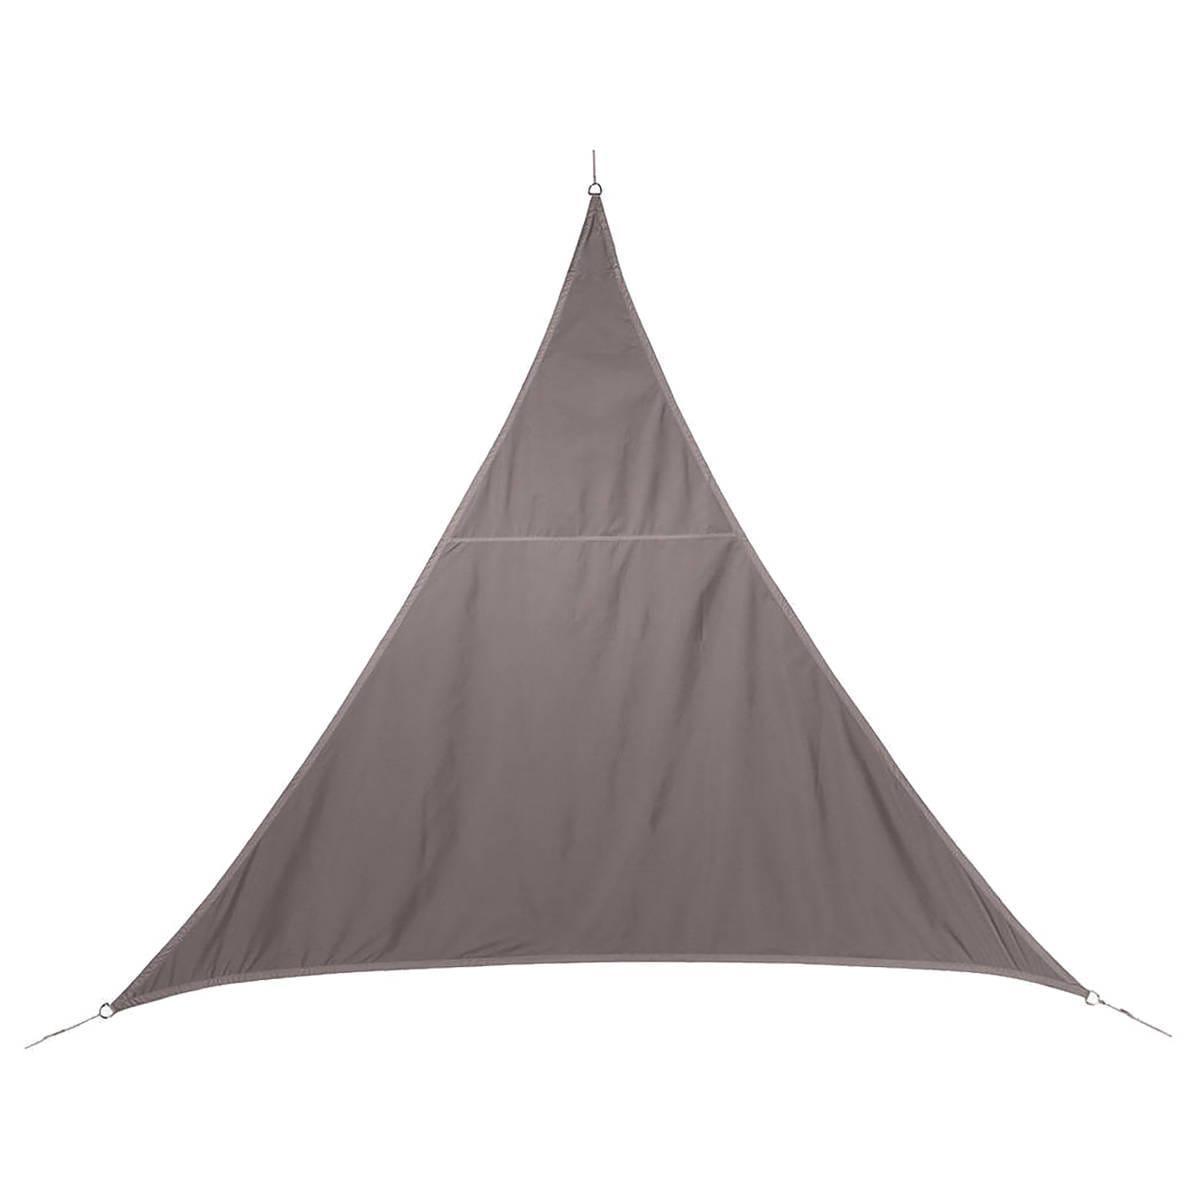 Voile d'ombrage Curacao - 5 x 5 x 5 m - Marron taupe - HESPERIDE